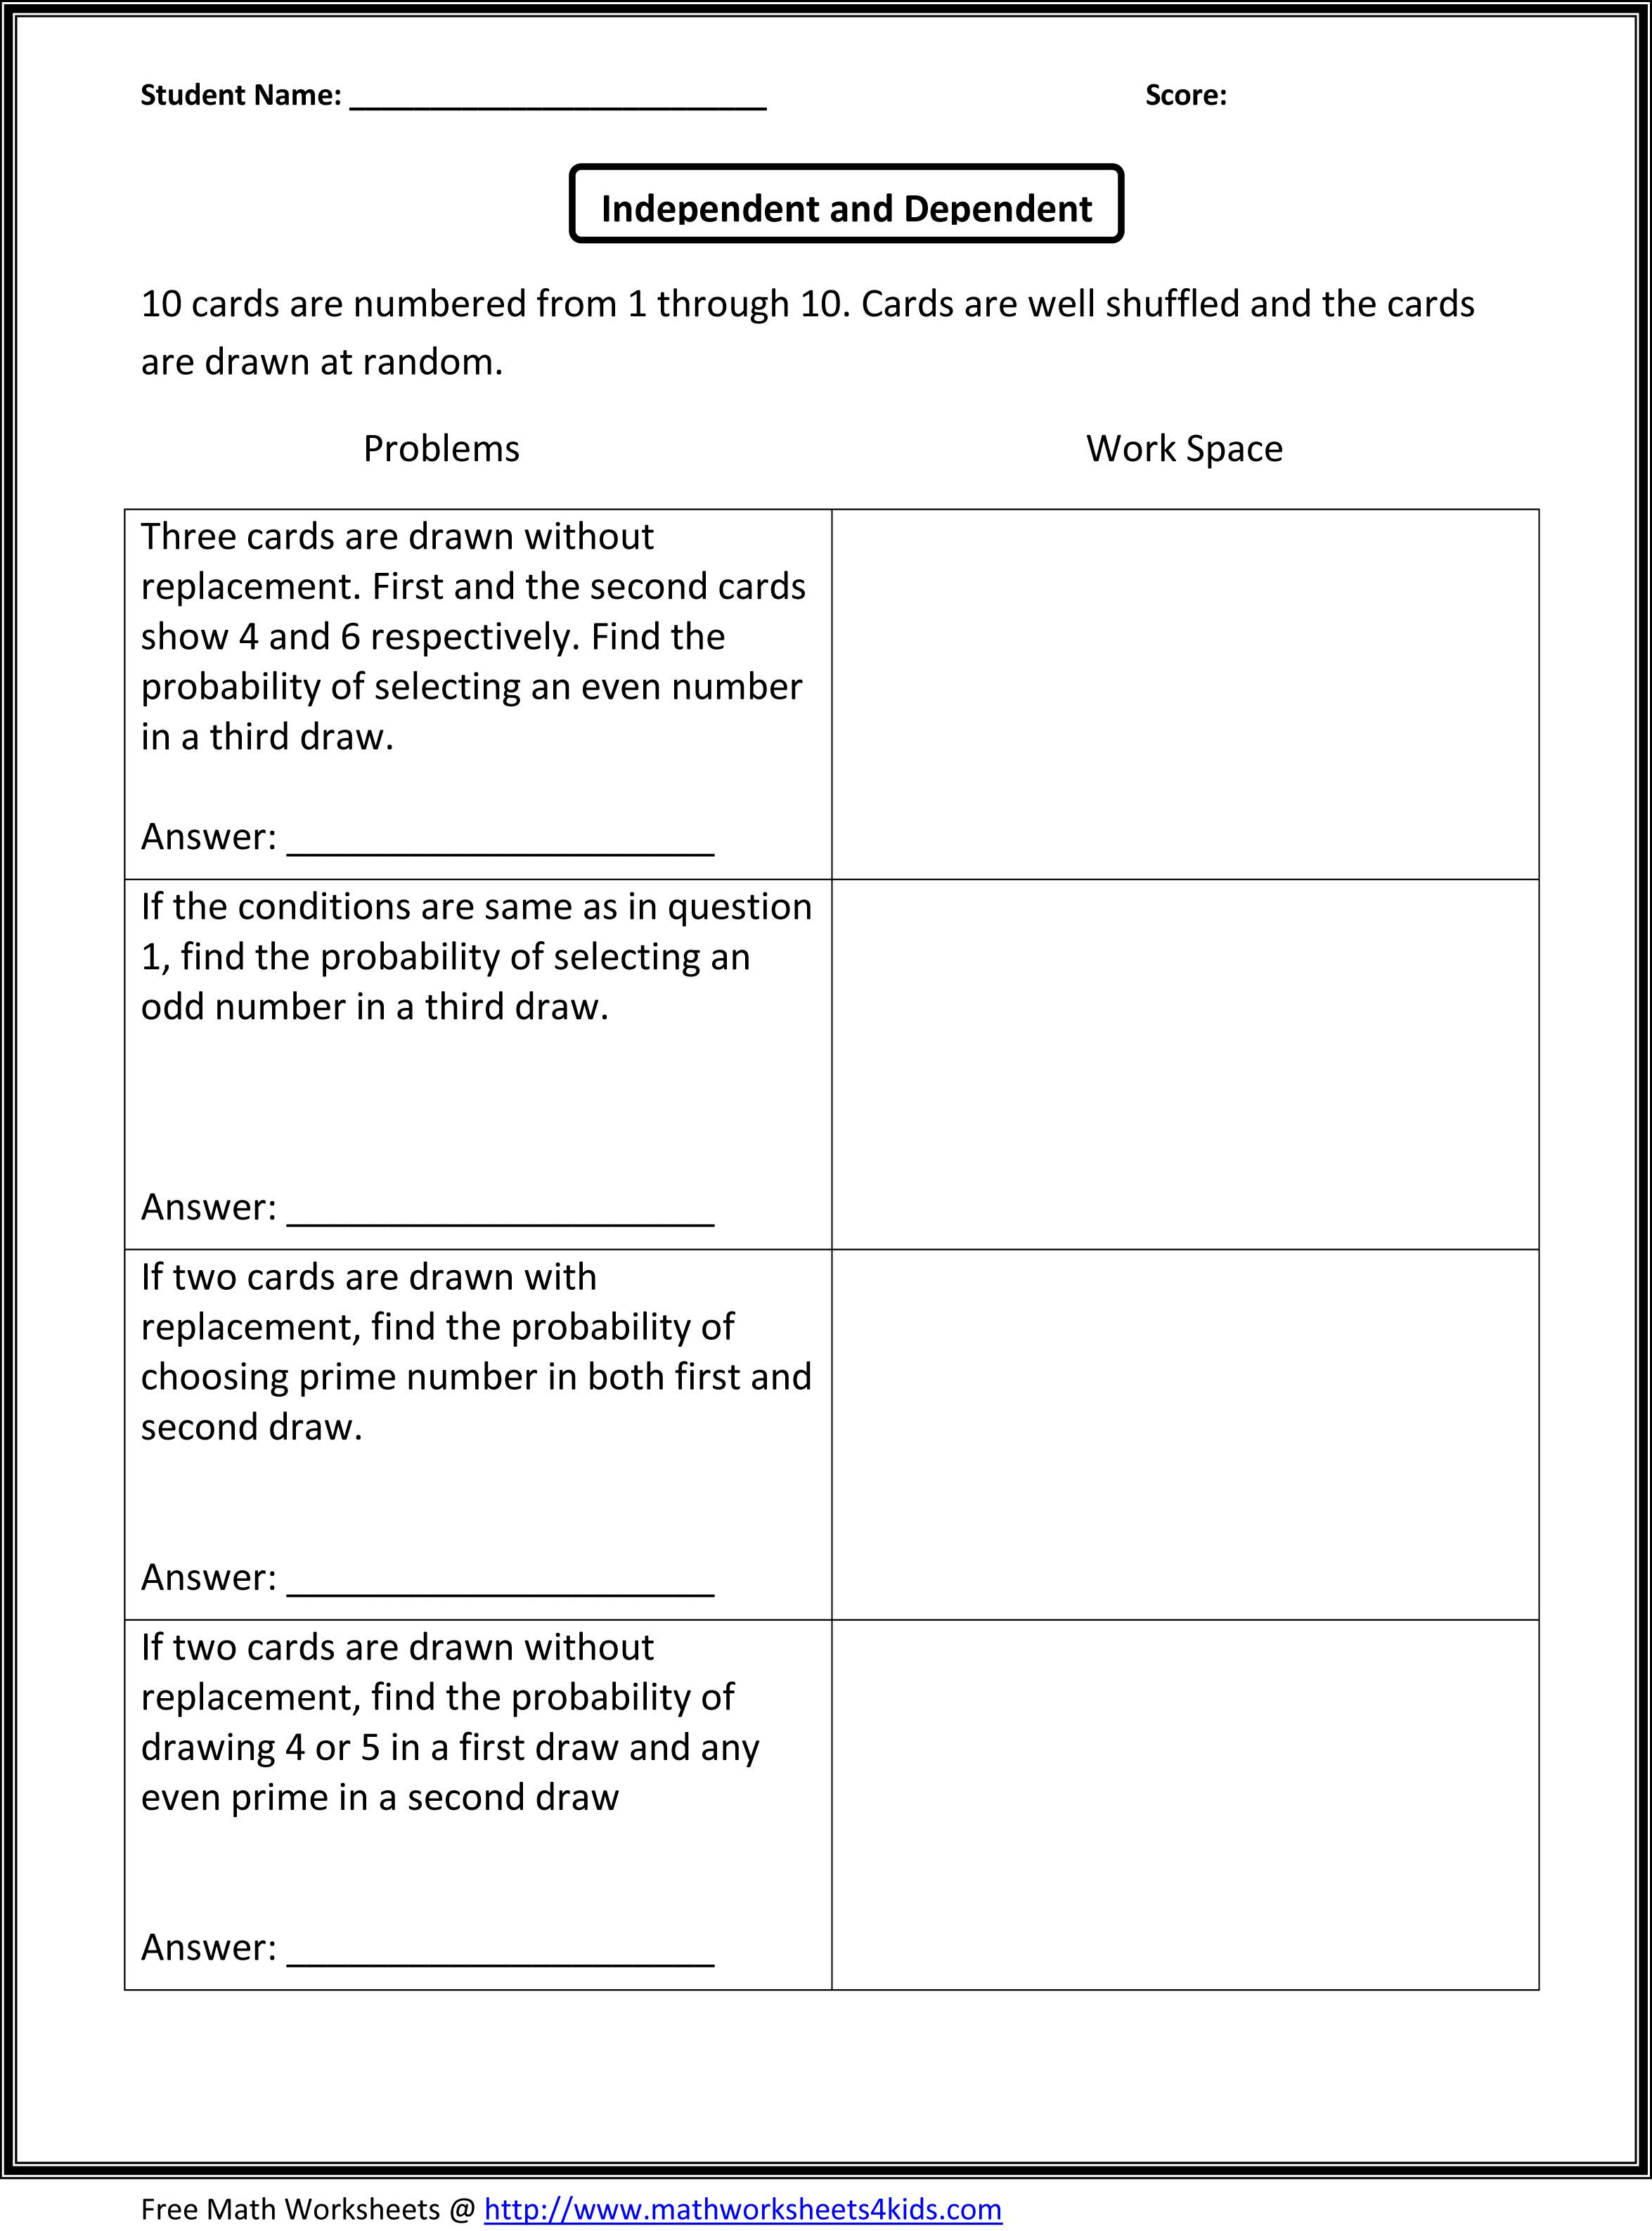 Probability Worksheets 7th Grade Probability Of Independent and Dependent events